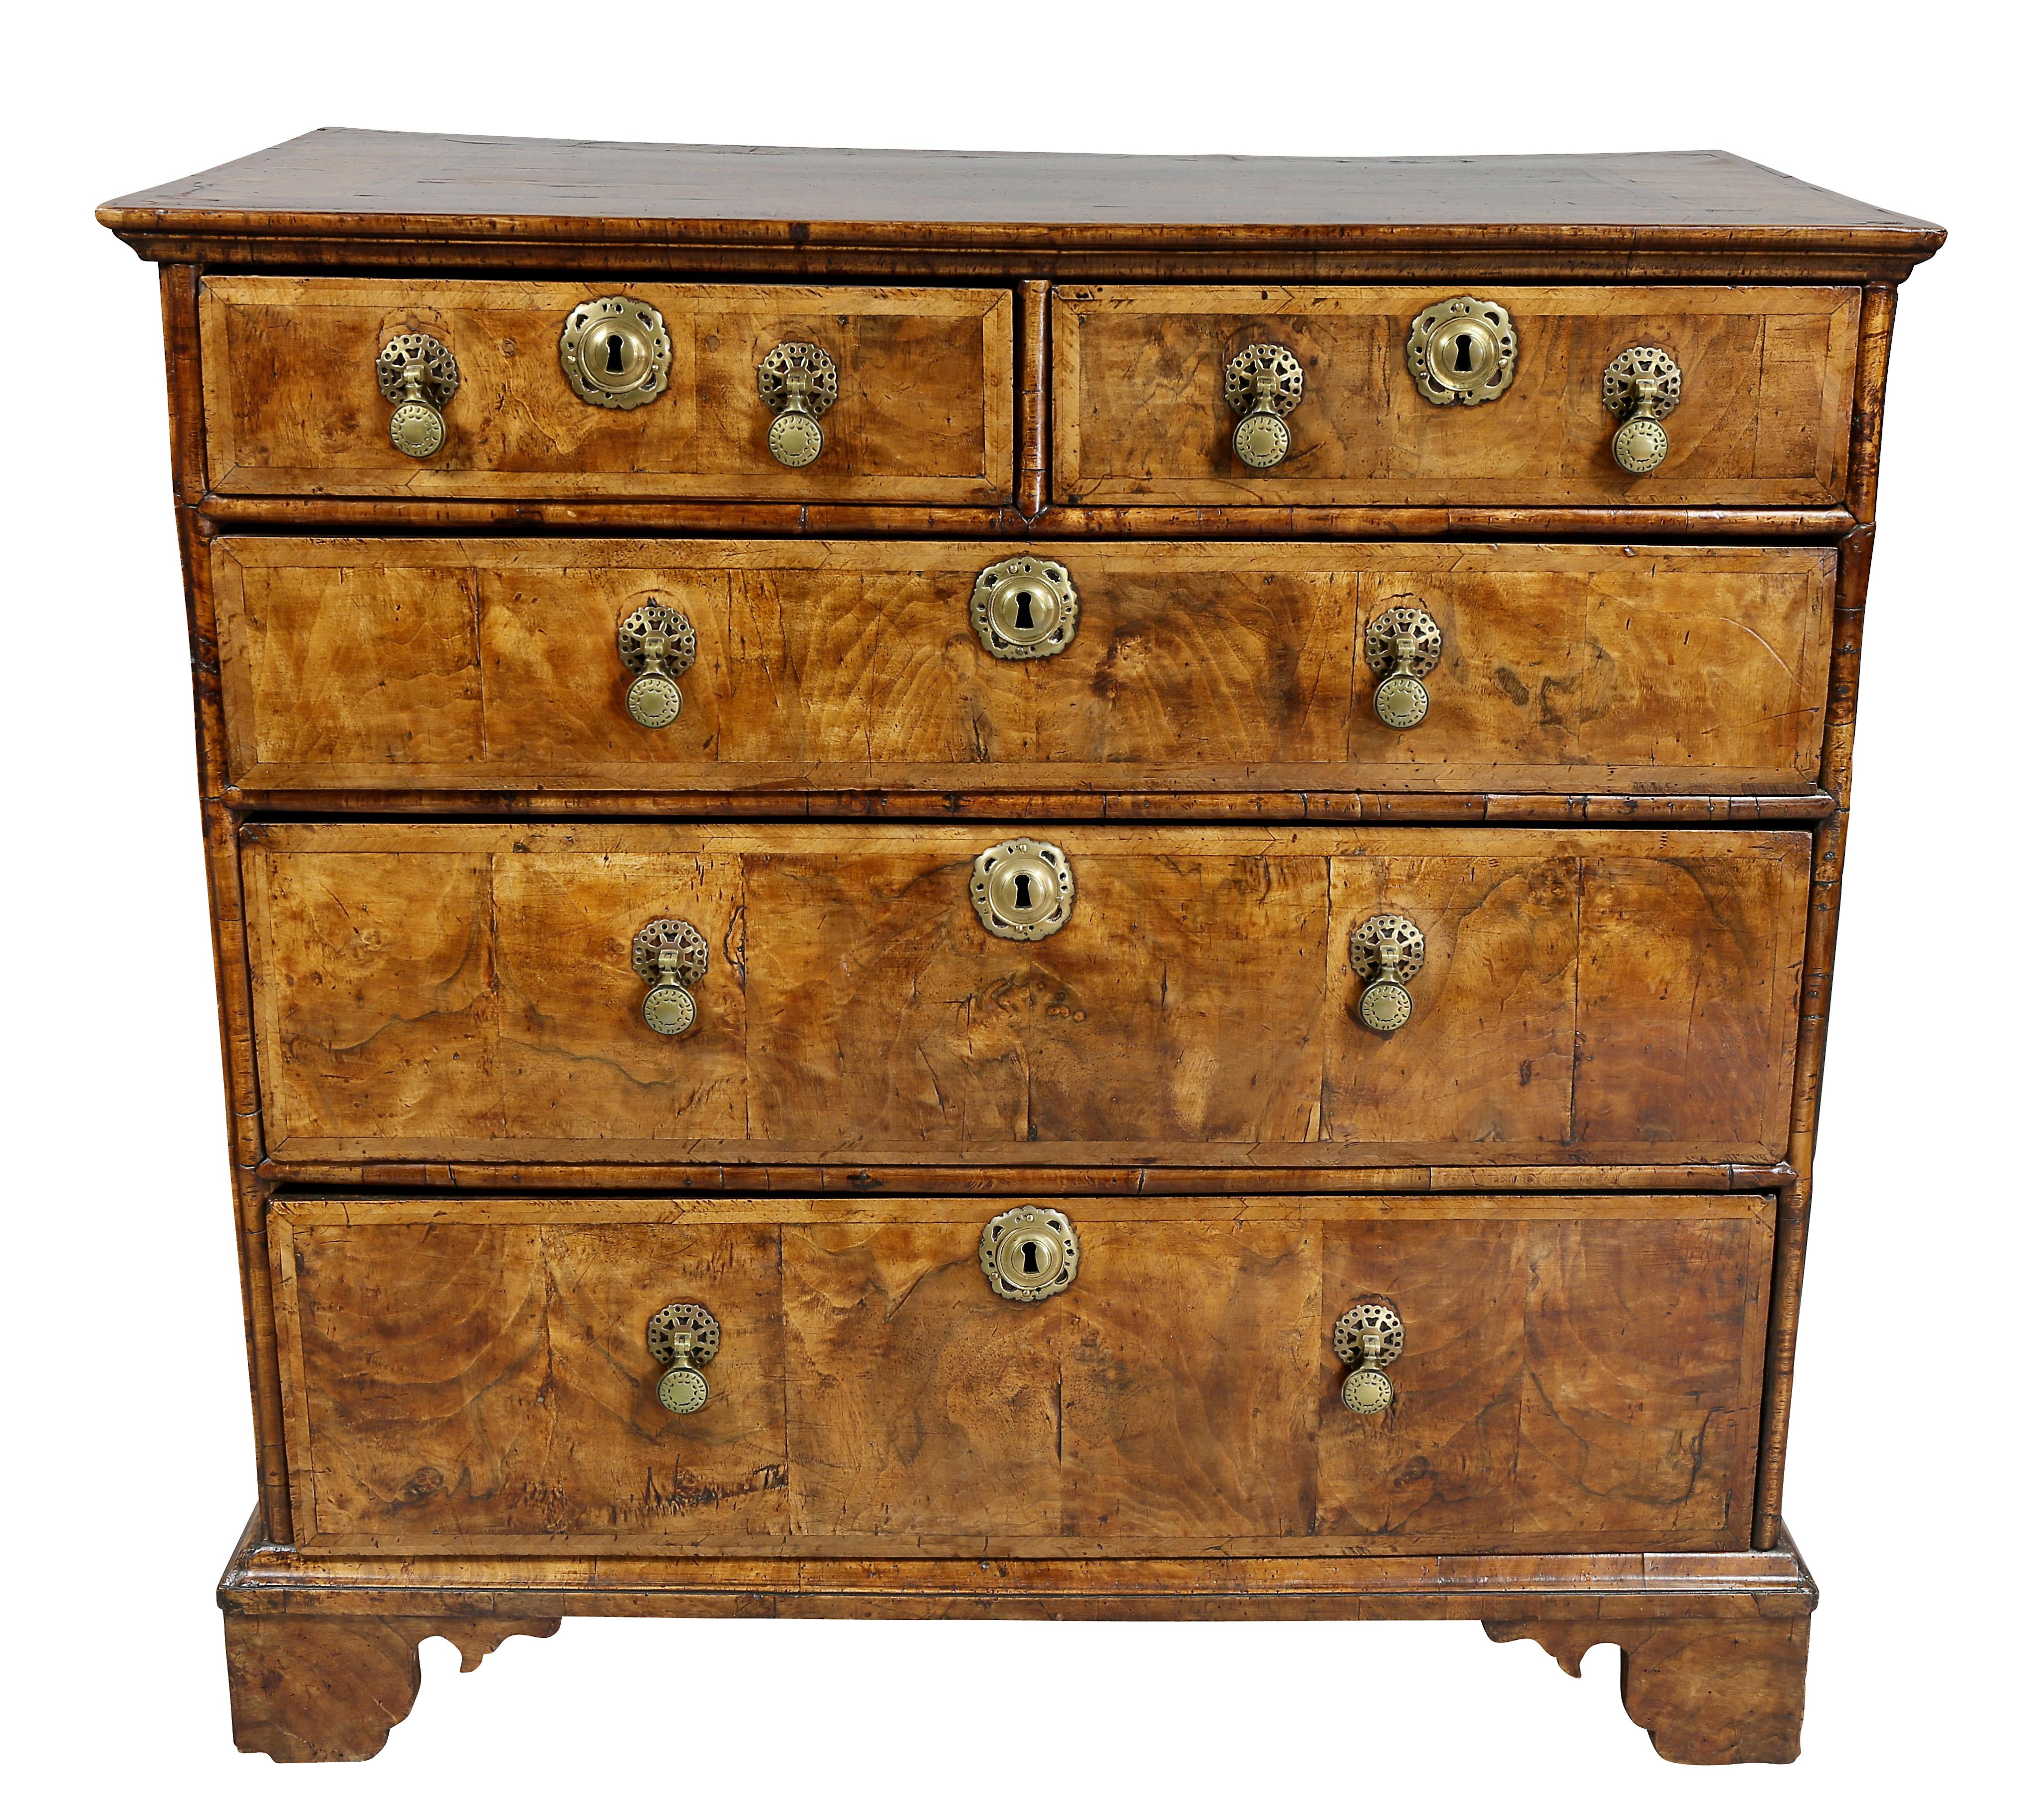 With beautifully figured walnut and gorgeous brown color, unusual handles and bracket feet.